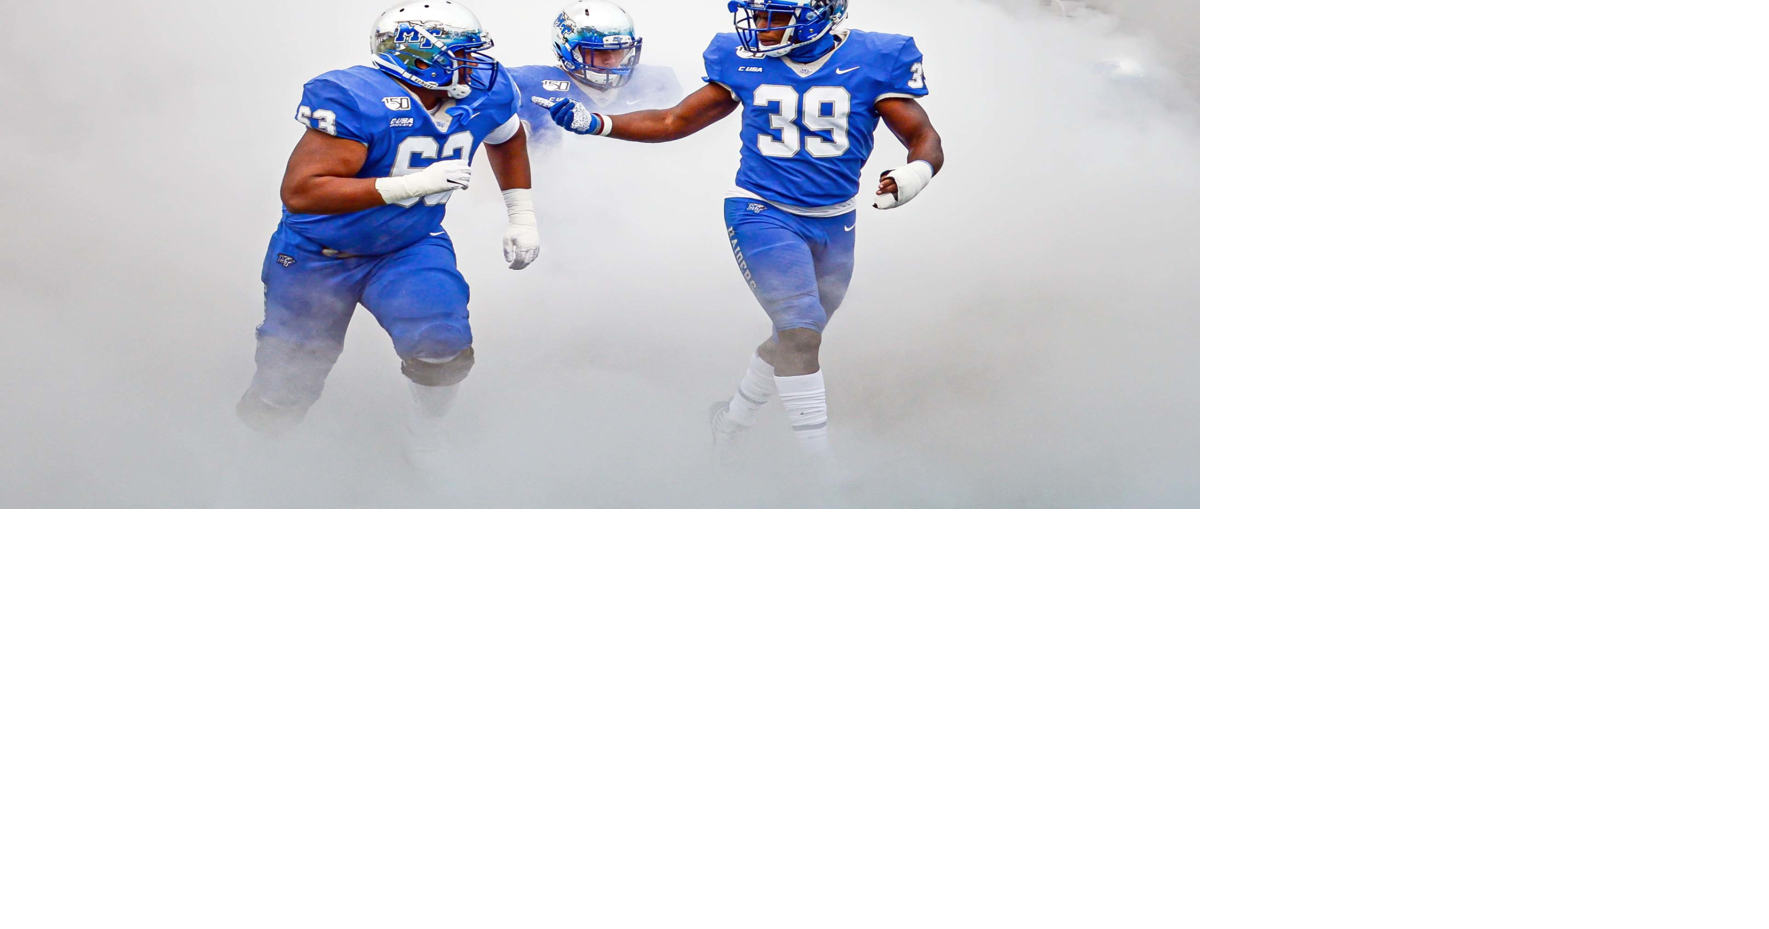 Mtsu To Open Football Season Against Army Area Colleges 